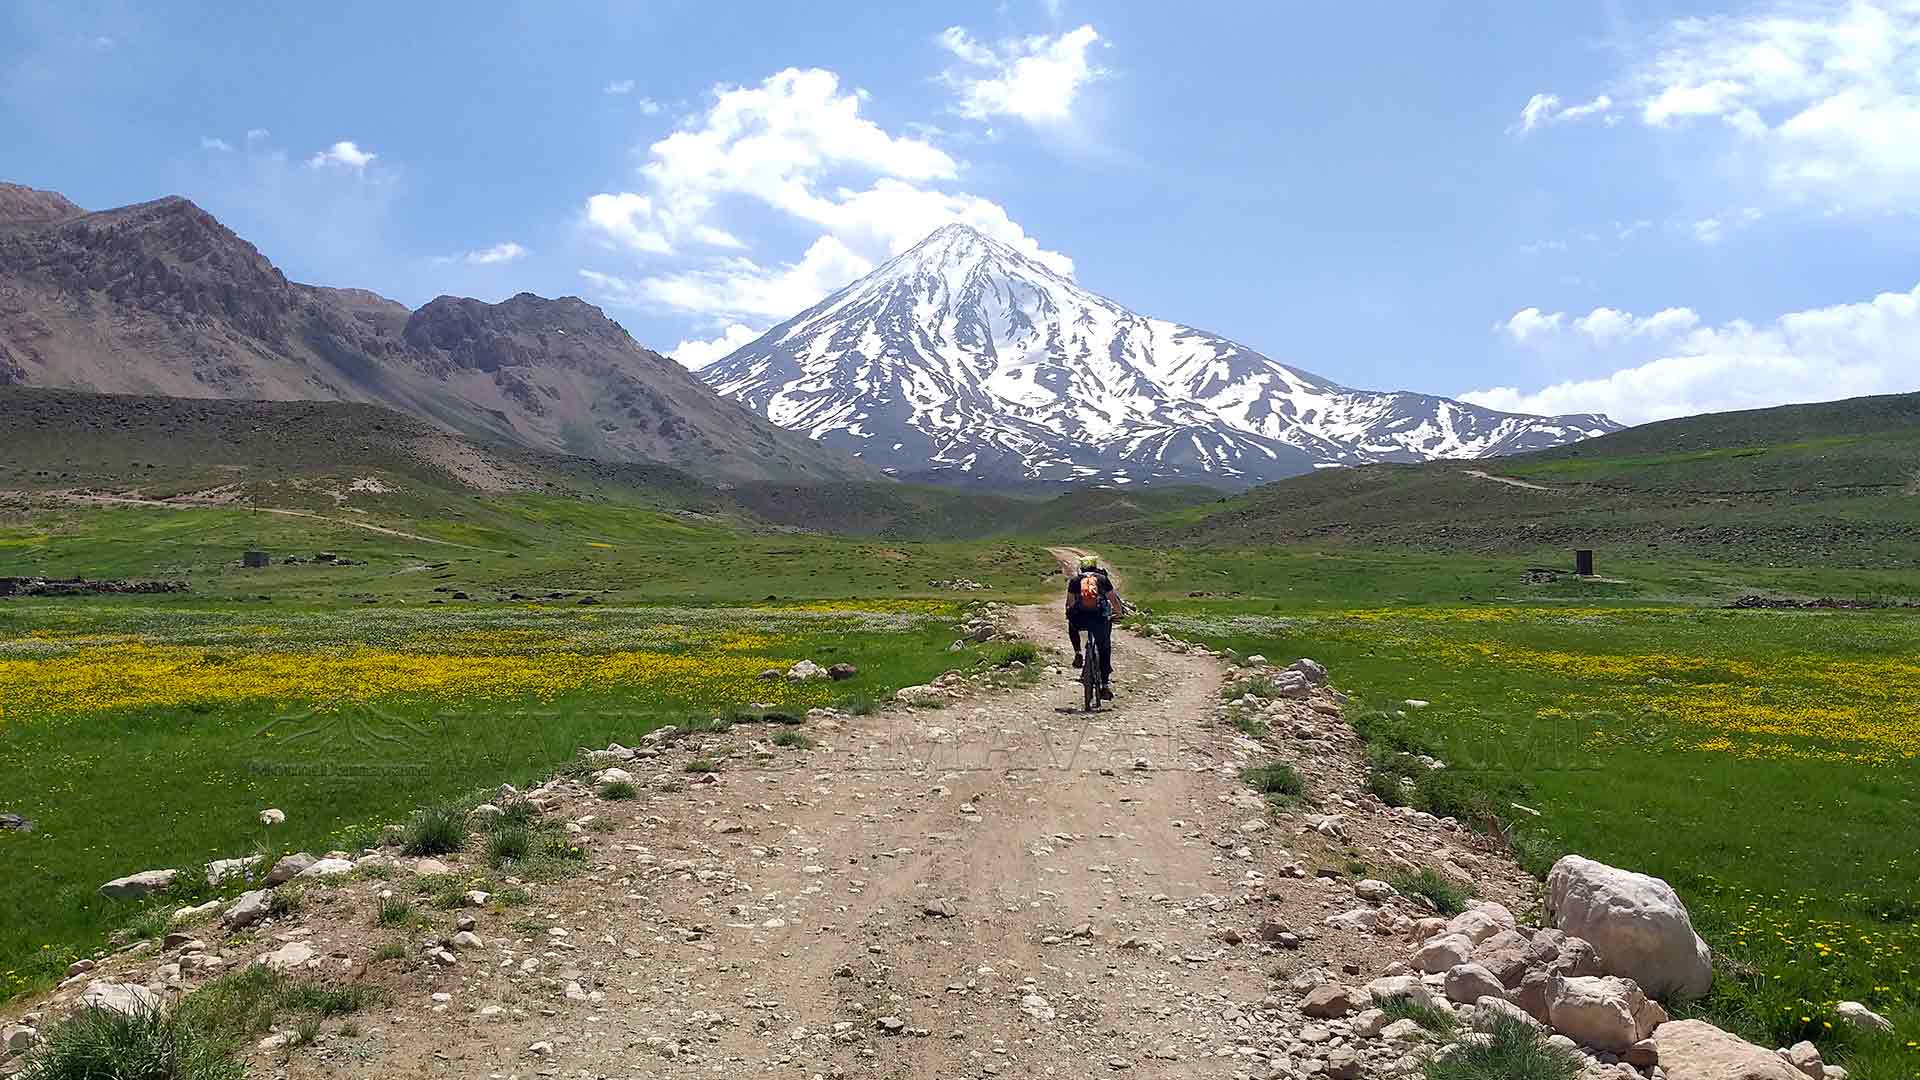 MTB in Lar National Park with view of Mount Damavand